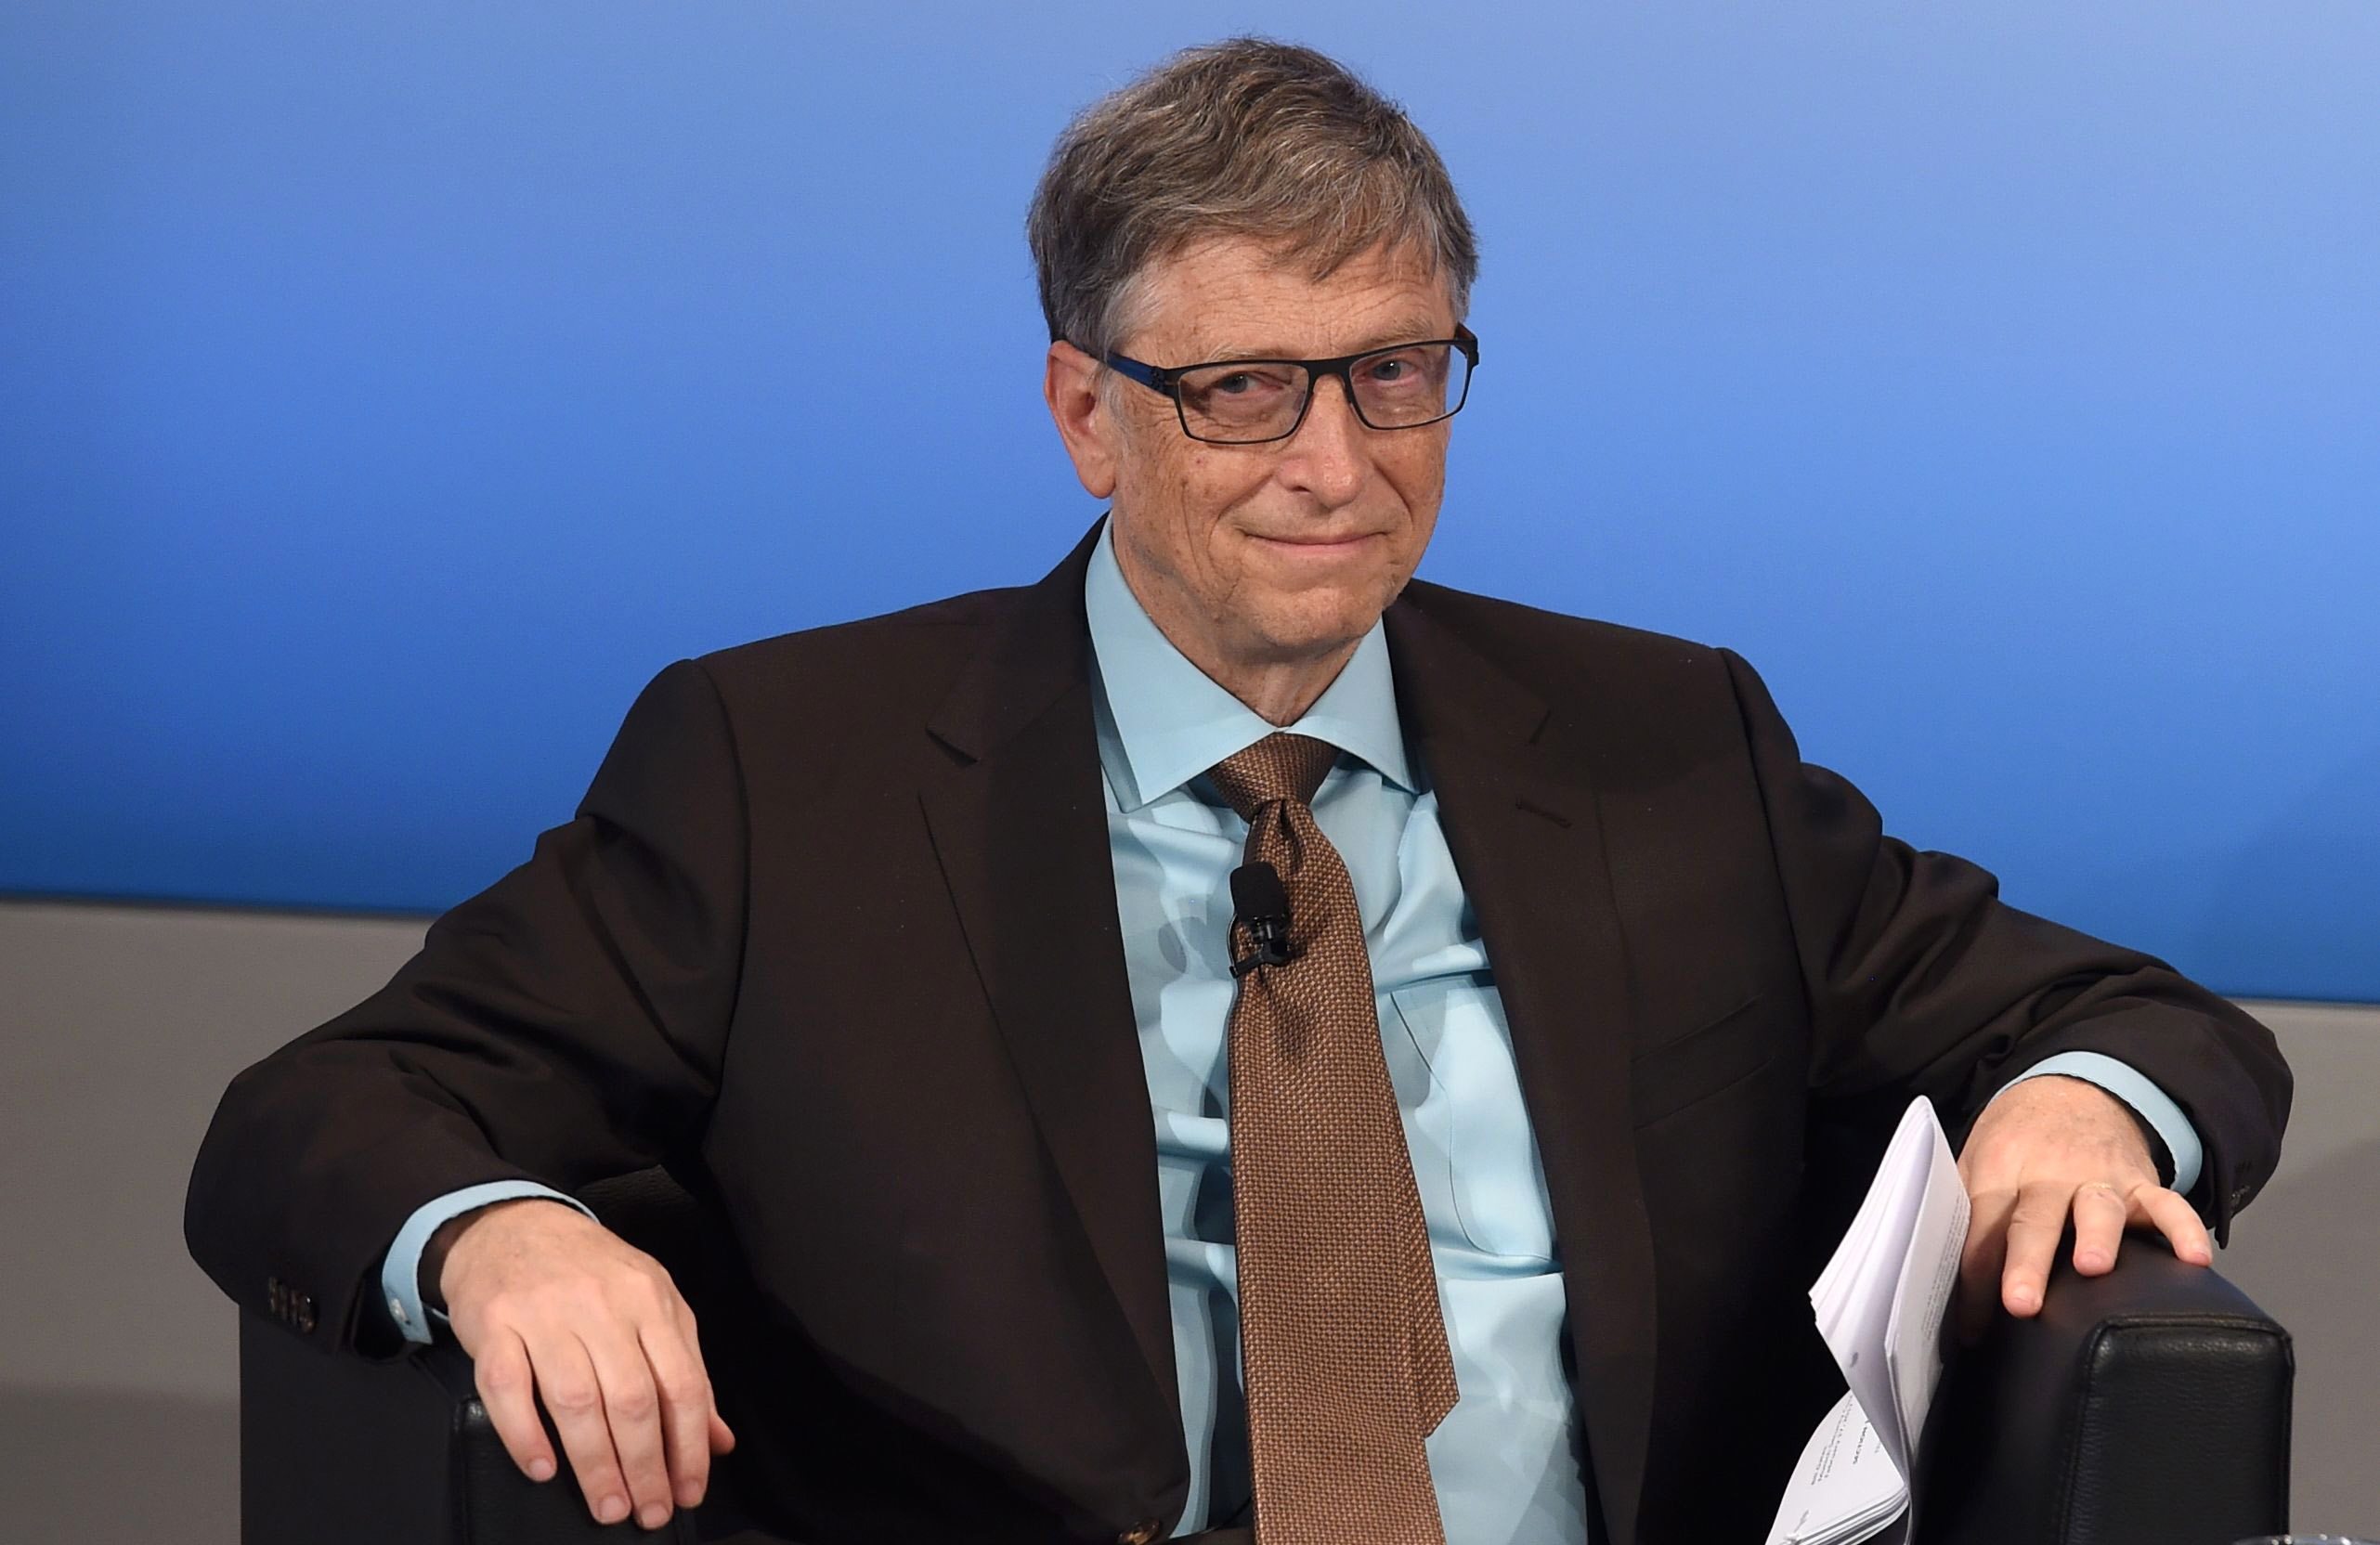 PHOTO: Microsoft founder Bill Gates on Feb. 18, 2017 at the 53rd Munich Security Conference (MSC) at the Bayerischer Hof hotel in Munich, Germany.
